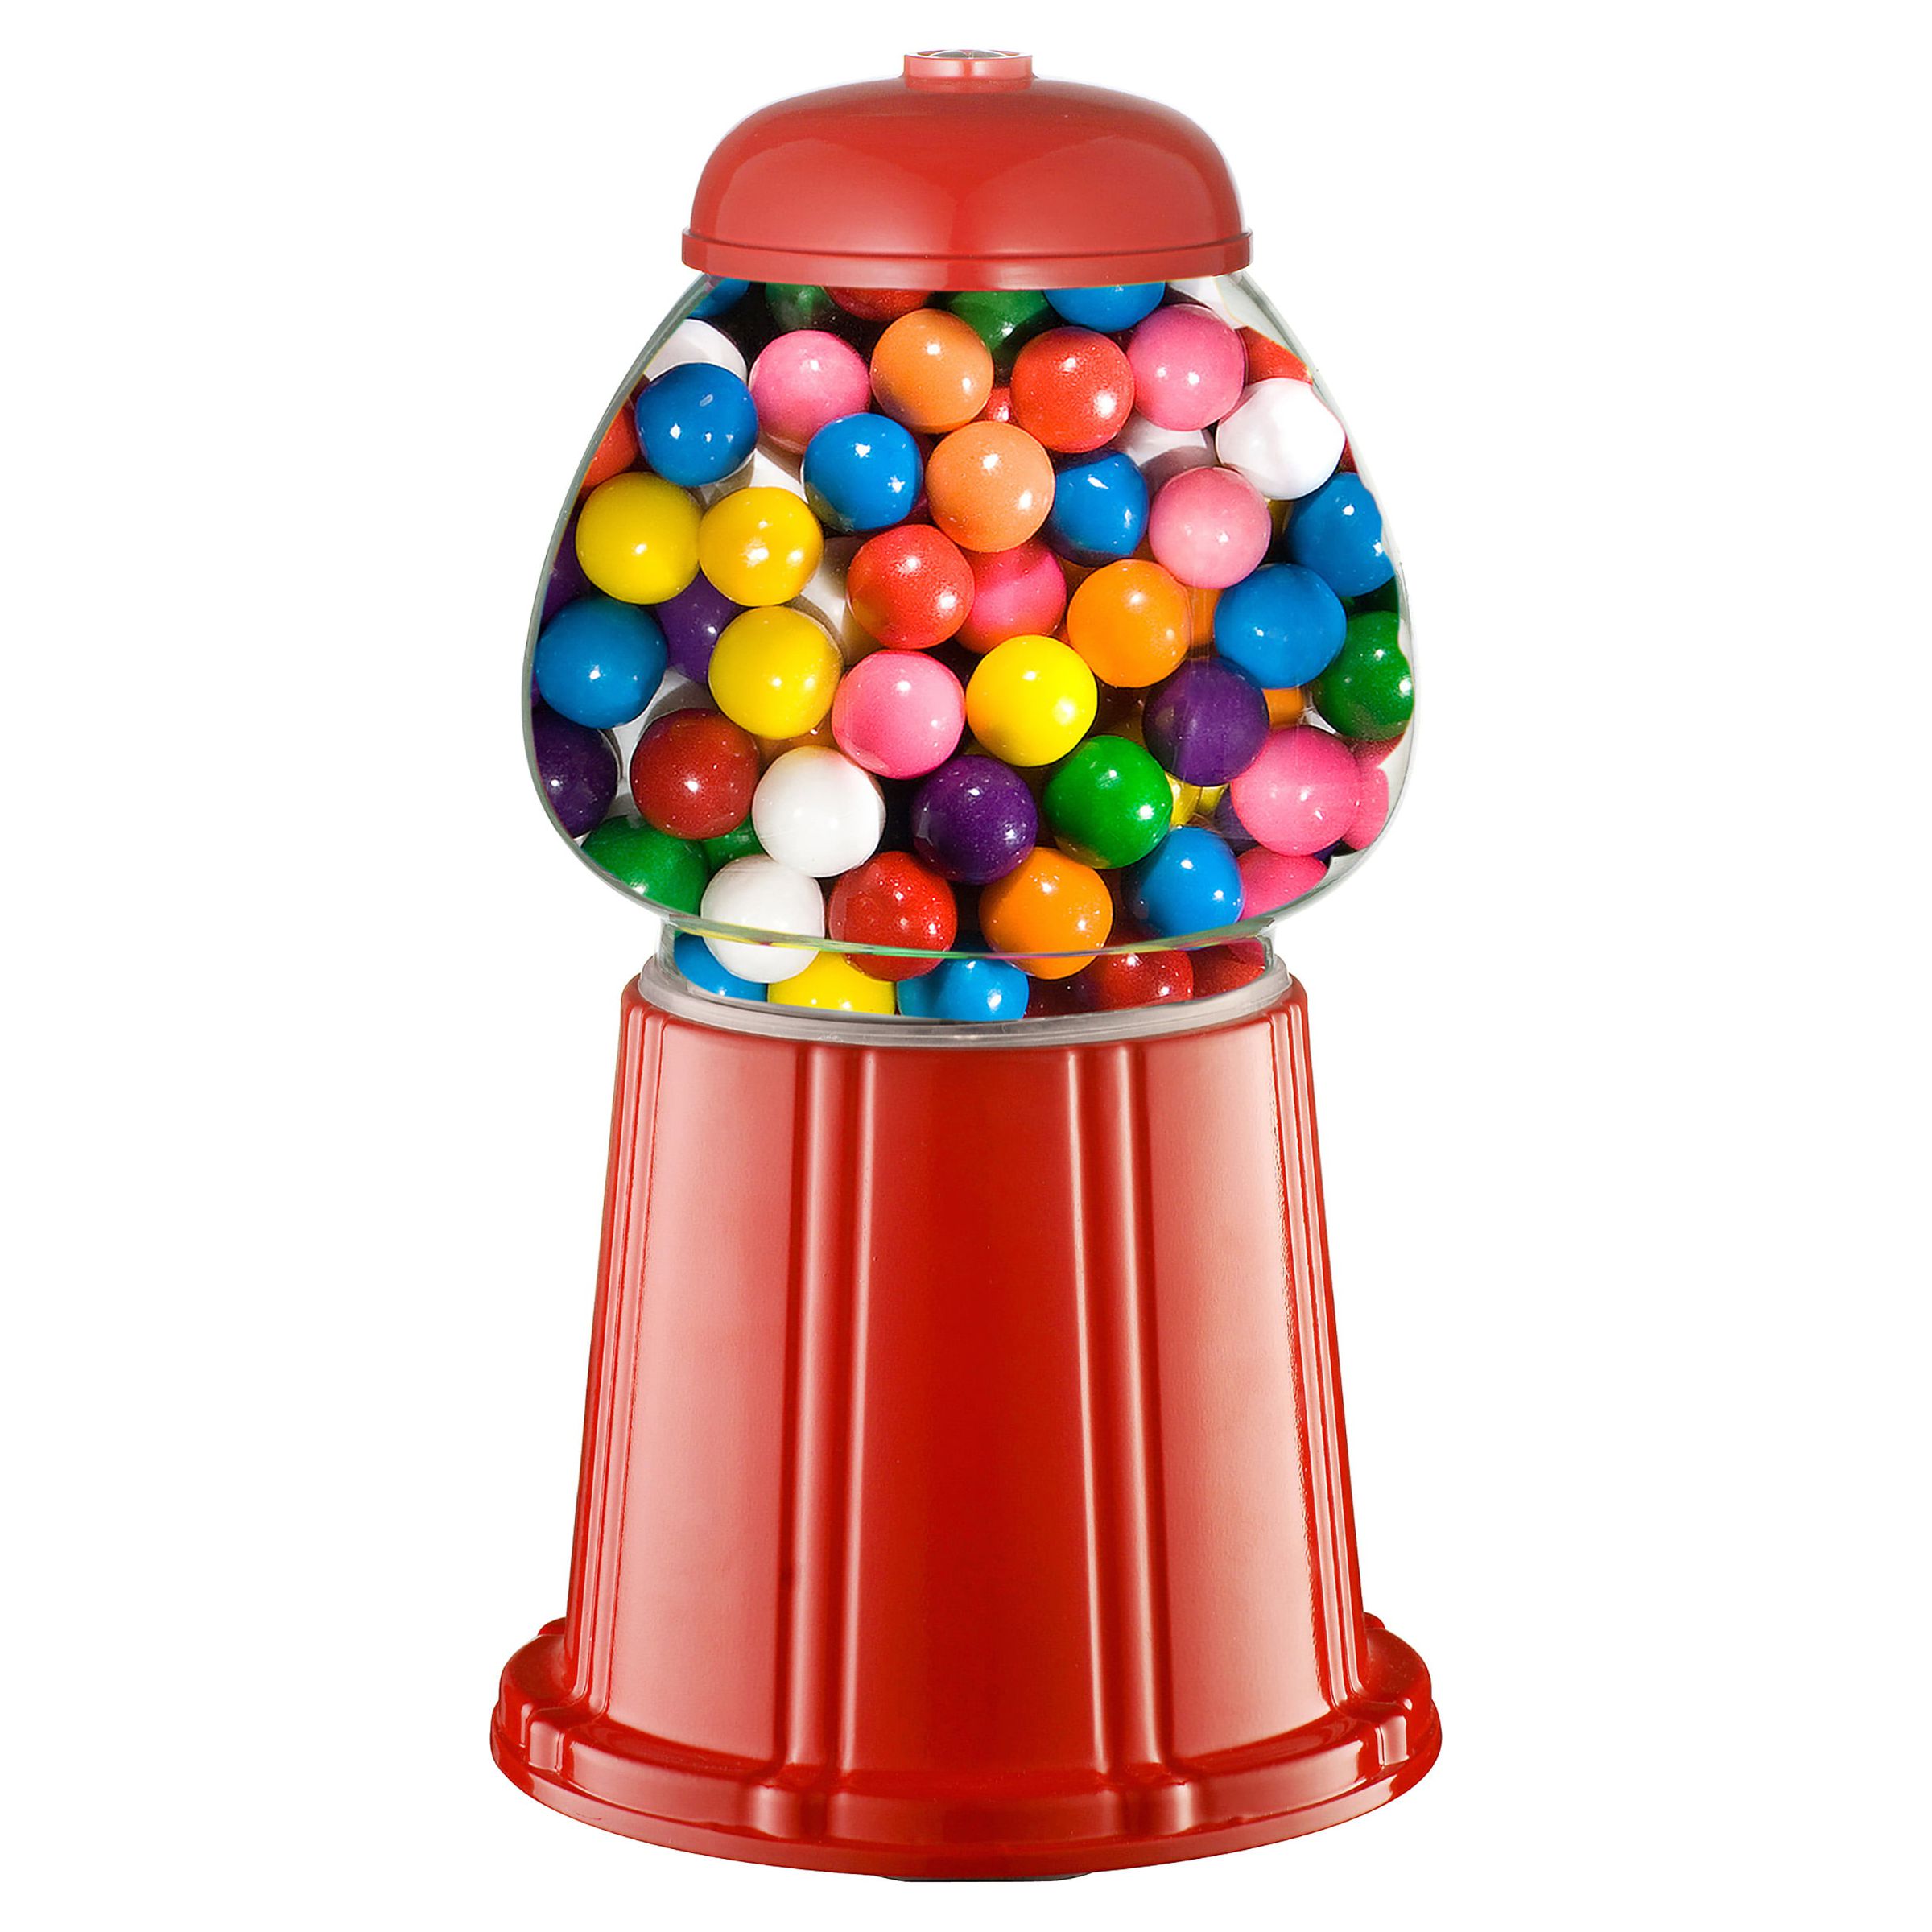 Great Northern 11" Junior Vintage Old Fashioned Candy Gumball Machine Bank Toy - Everyone Loves Gumballs! - image 3 of 7